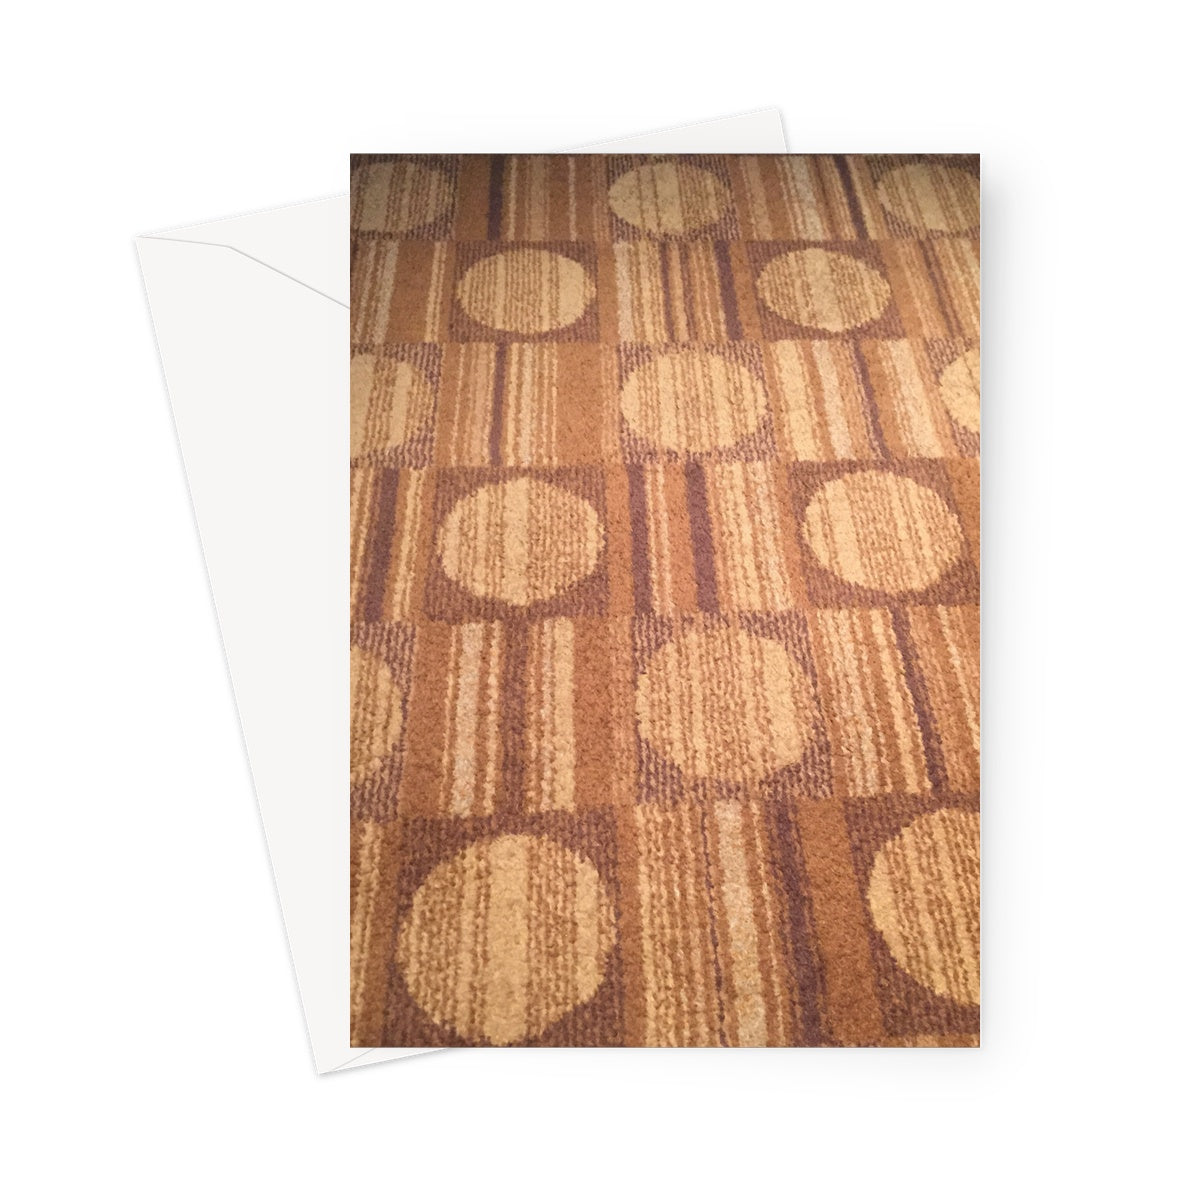 Fabulous retro style carpet with brown circles and stripes is a closeup image in this funky greeting card